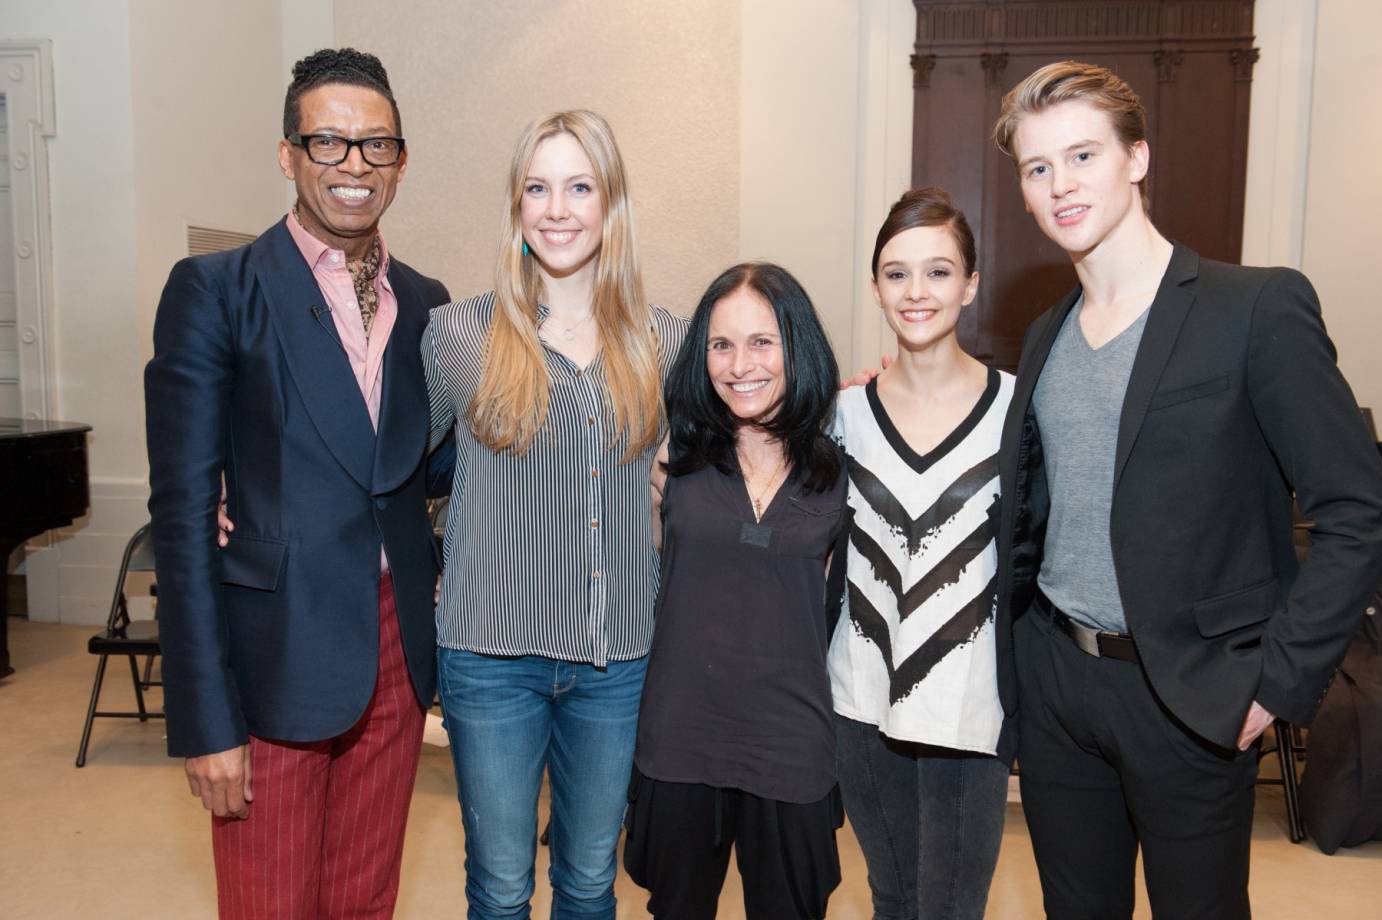 Pictured from Left to Right: Fashion designer B Michael, choreographer Andrea Schermoly, Barbara Brandt, NYCB dancers Lauren Lovette and Chase Finlay